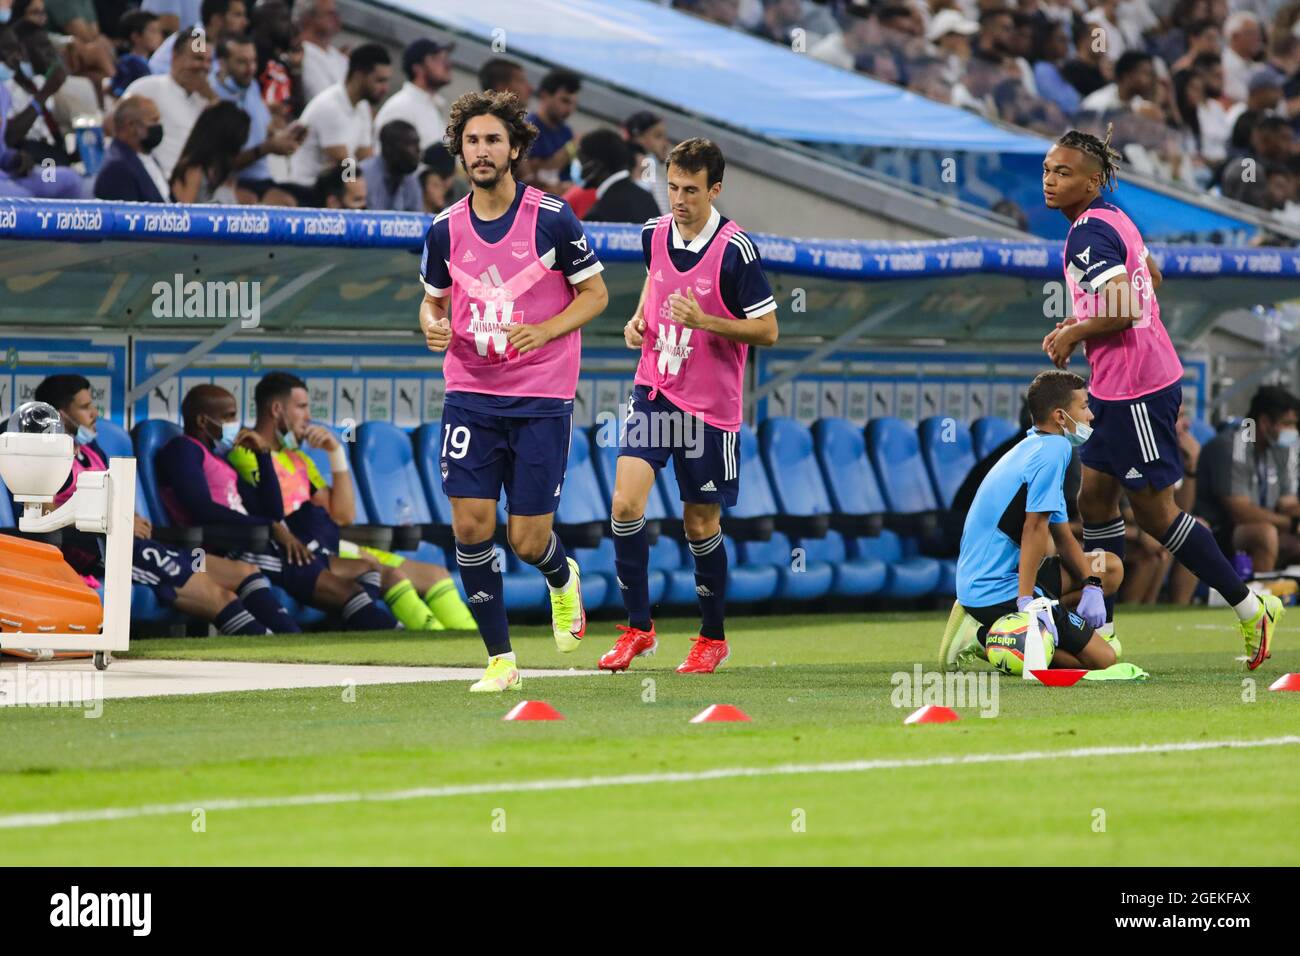 L-R) Yacine Adli, Ruben Pardo and Mara Sekou of Girondins de Bordeaux warm  up during the Ligue 1 Uber Eats match between Marseille and Bordeaux at Or  Stock Photo - Alamy